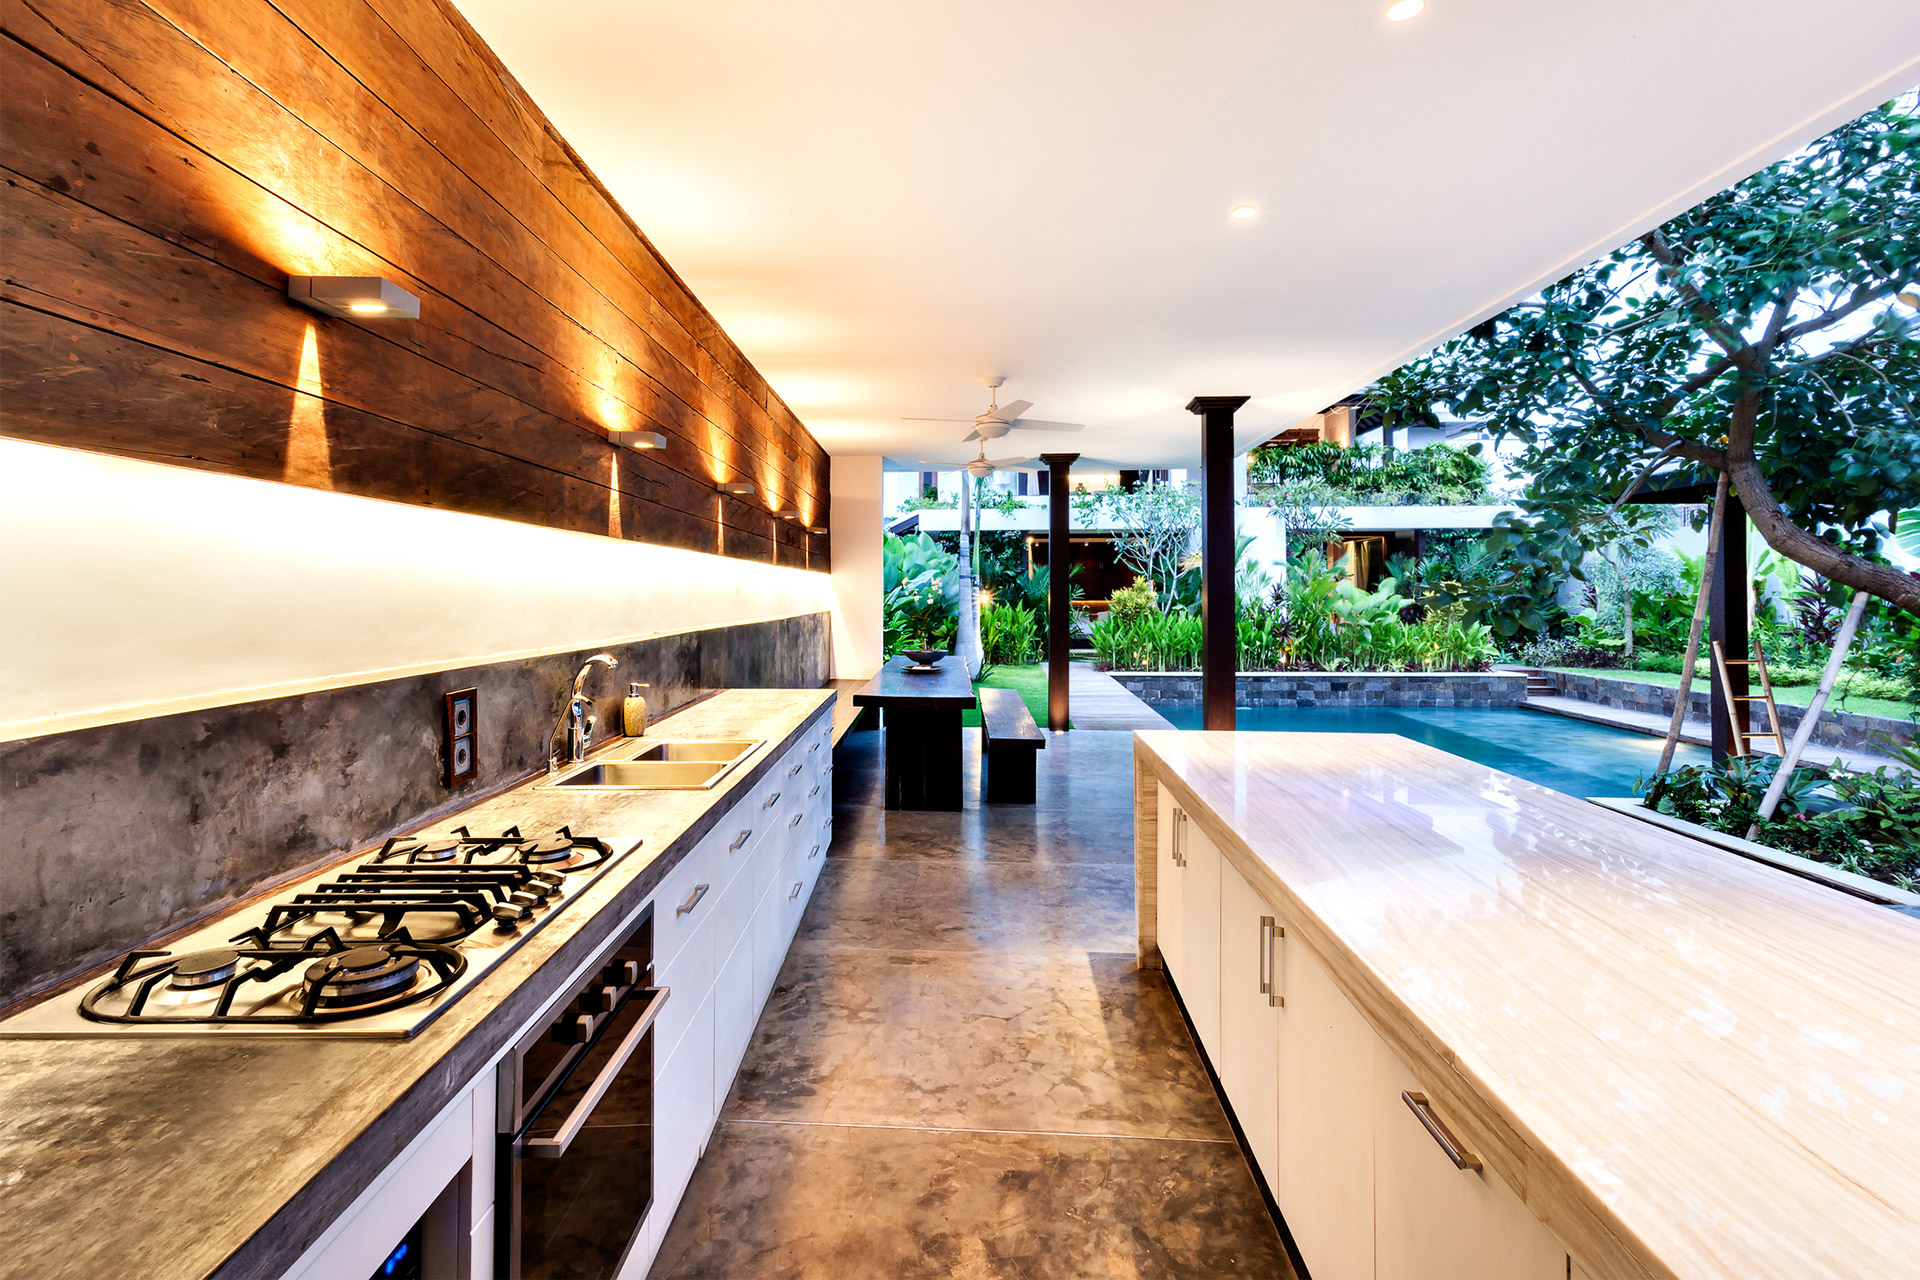 a modern outdoor kitchen setup with stainless steel appliances, granite countertops, and bar seating, nestled in a cozy patio area